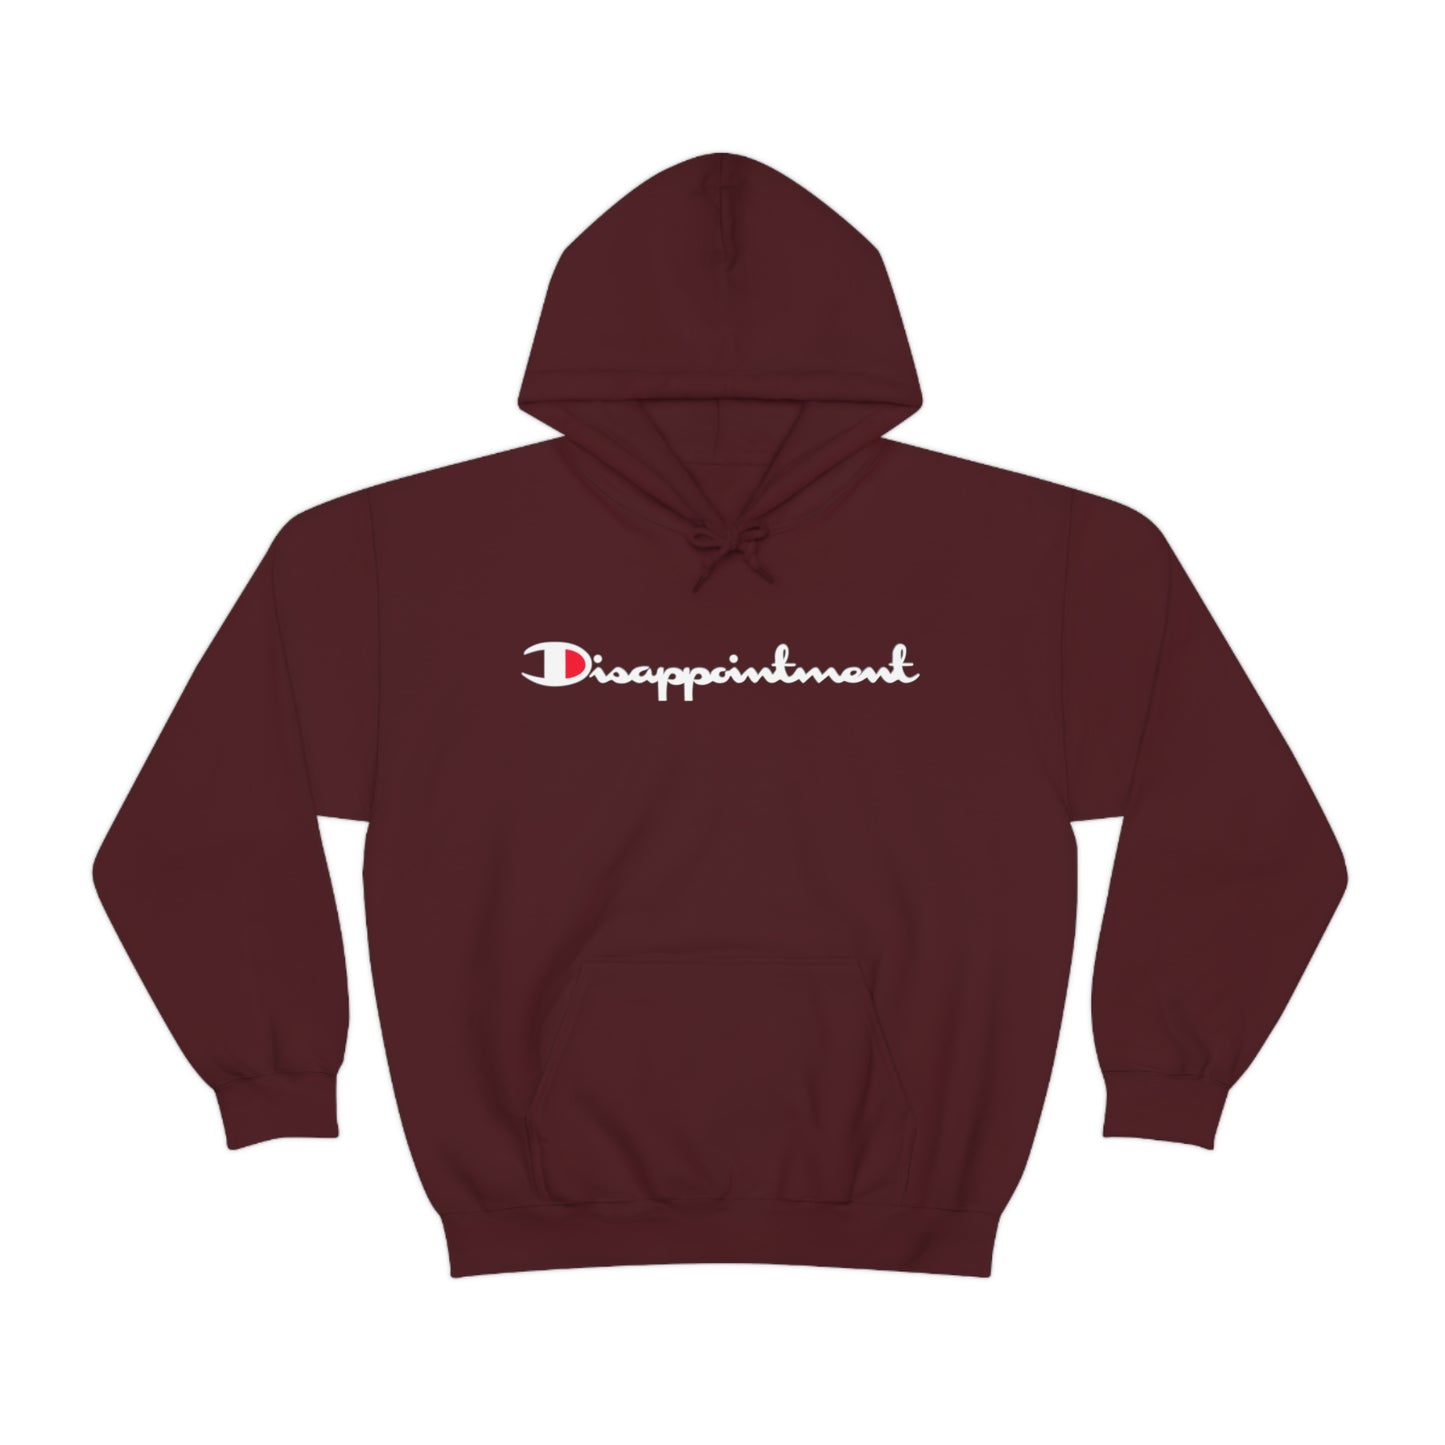 "Disappointment" Hoodie